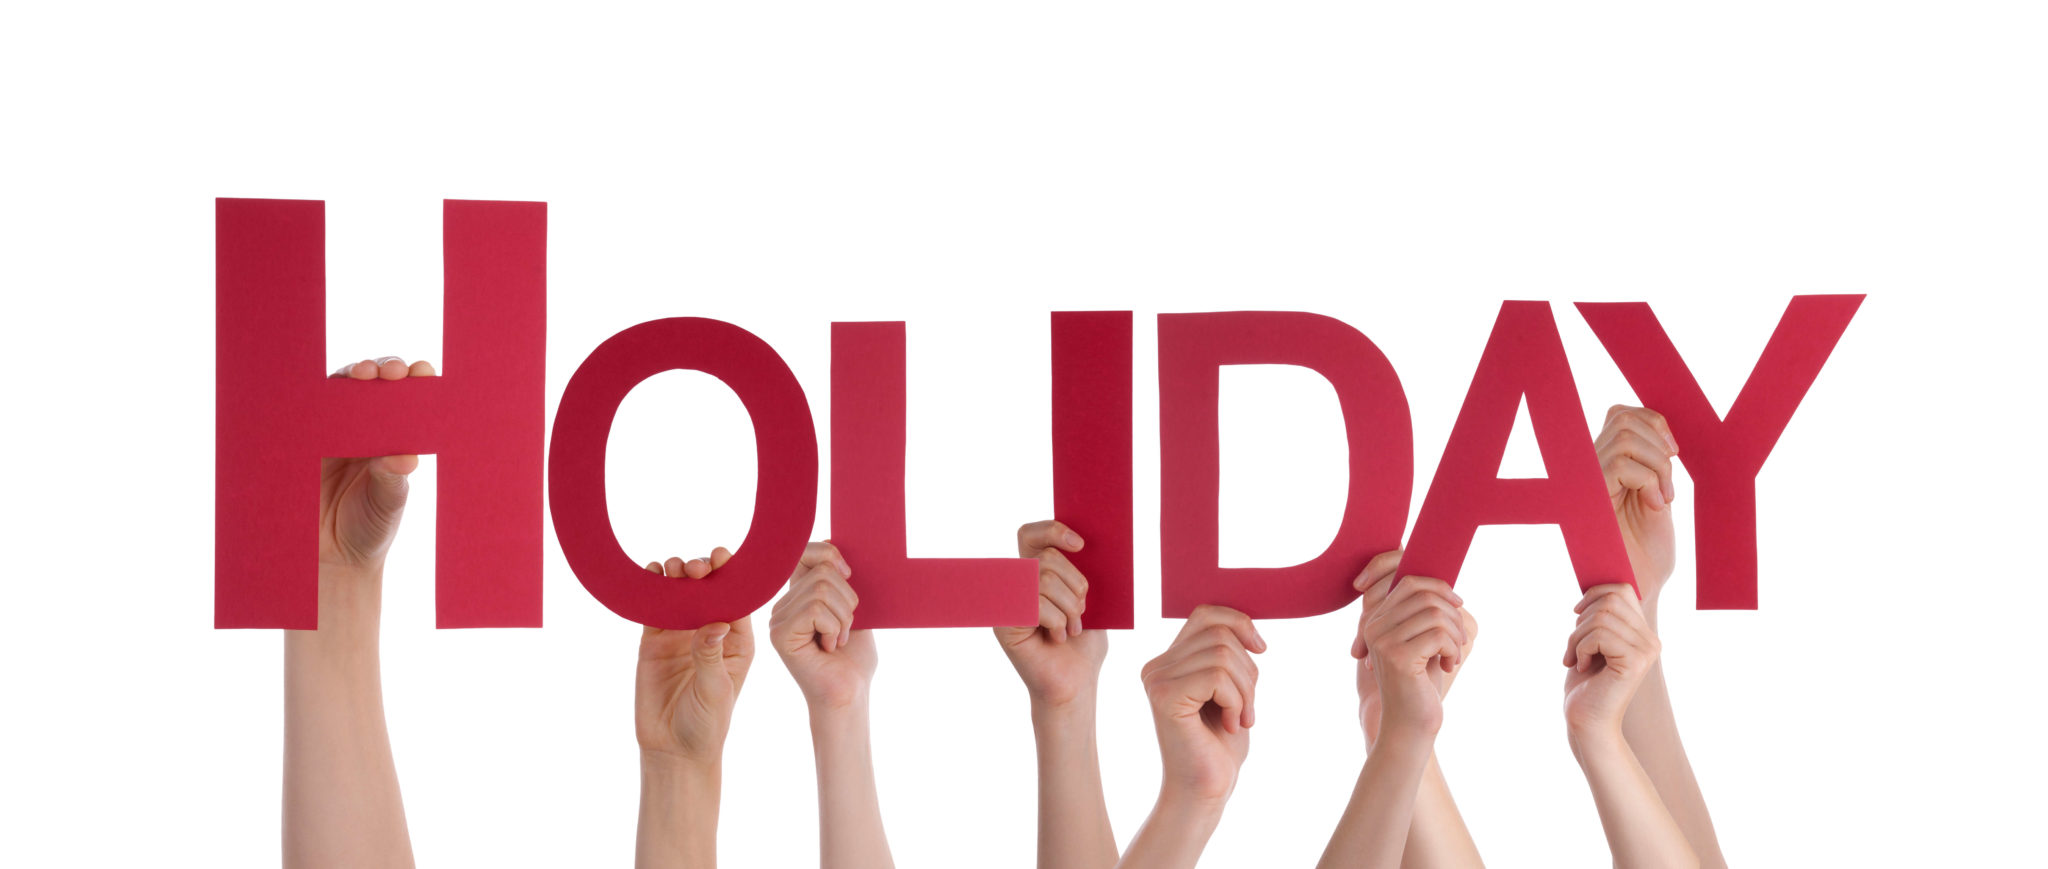 holiday image held up by hands rocky mount event center